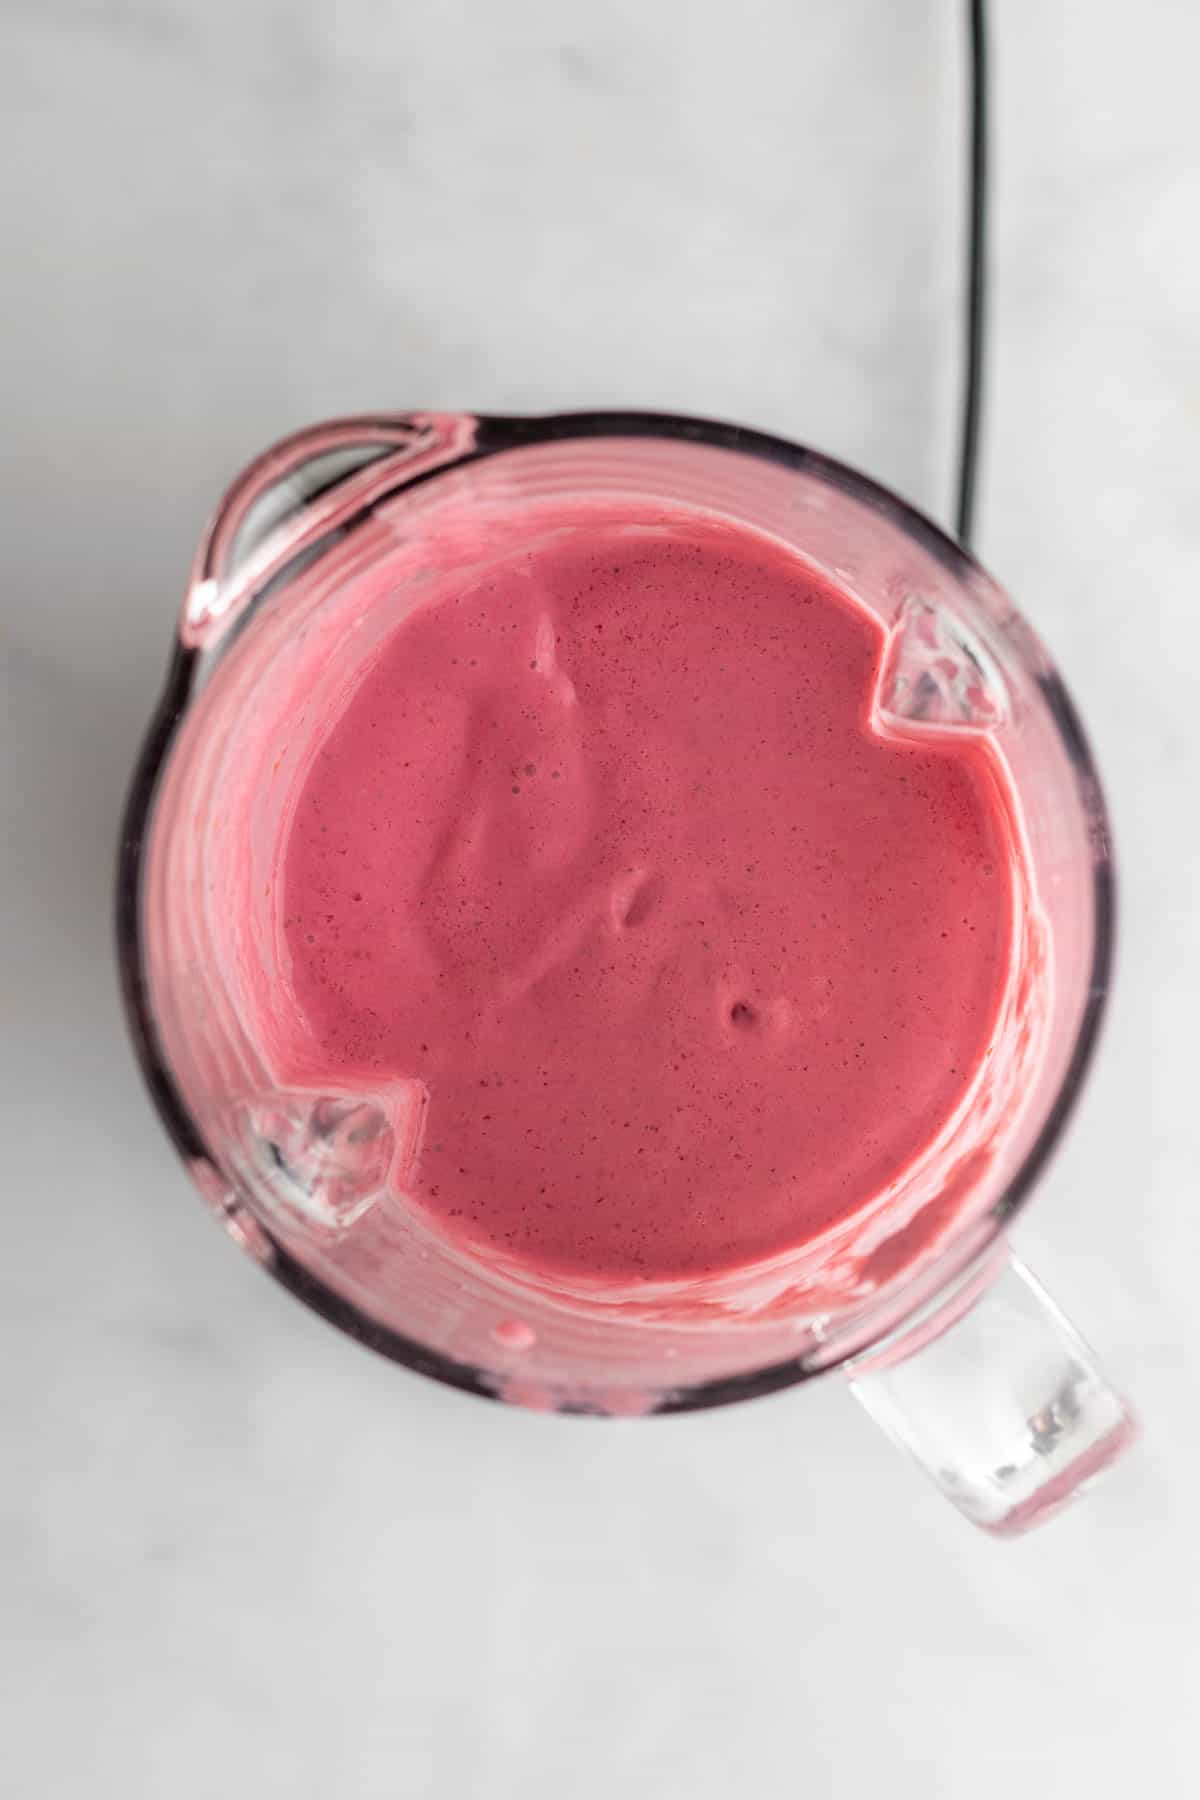 Smoothie ingredients blended in a blender, as seen from above